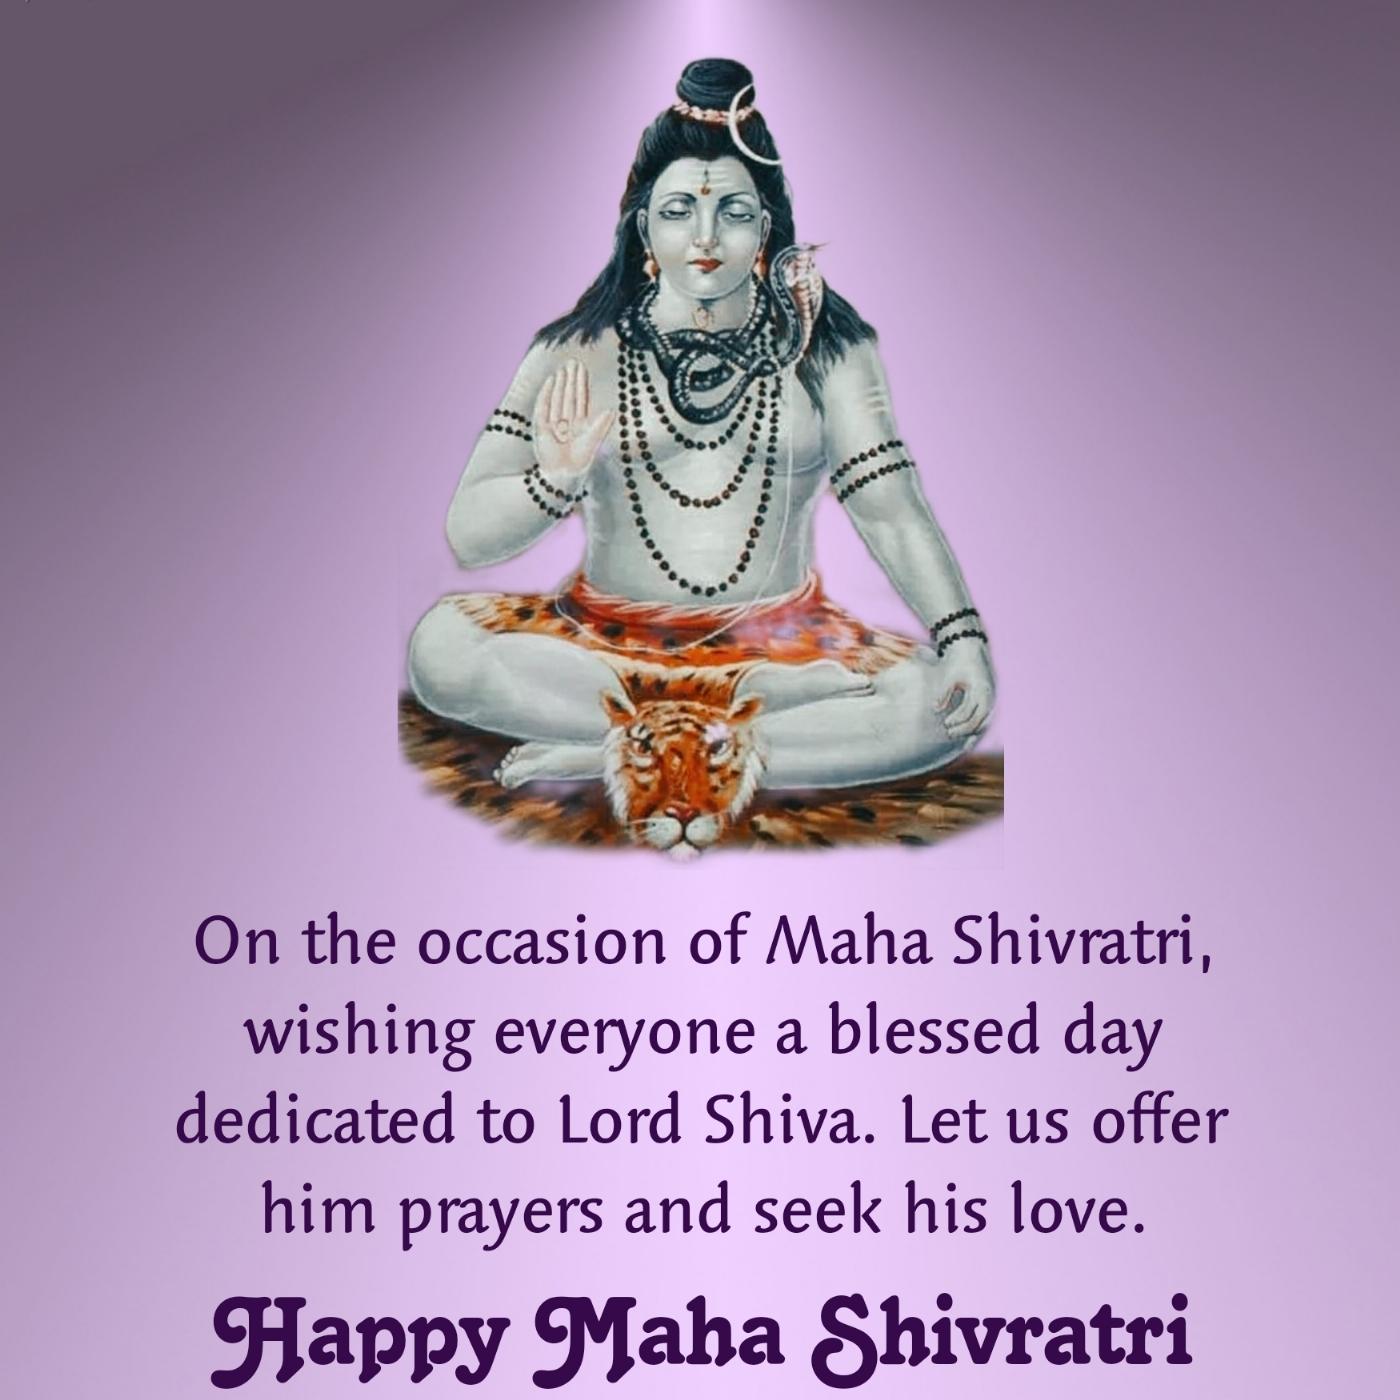 On the occasion of Maha Shivratri wishing everyone a blessed day